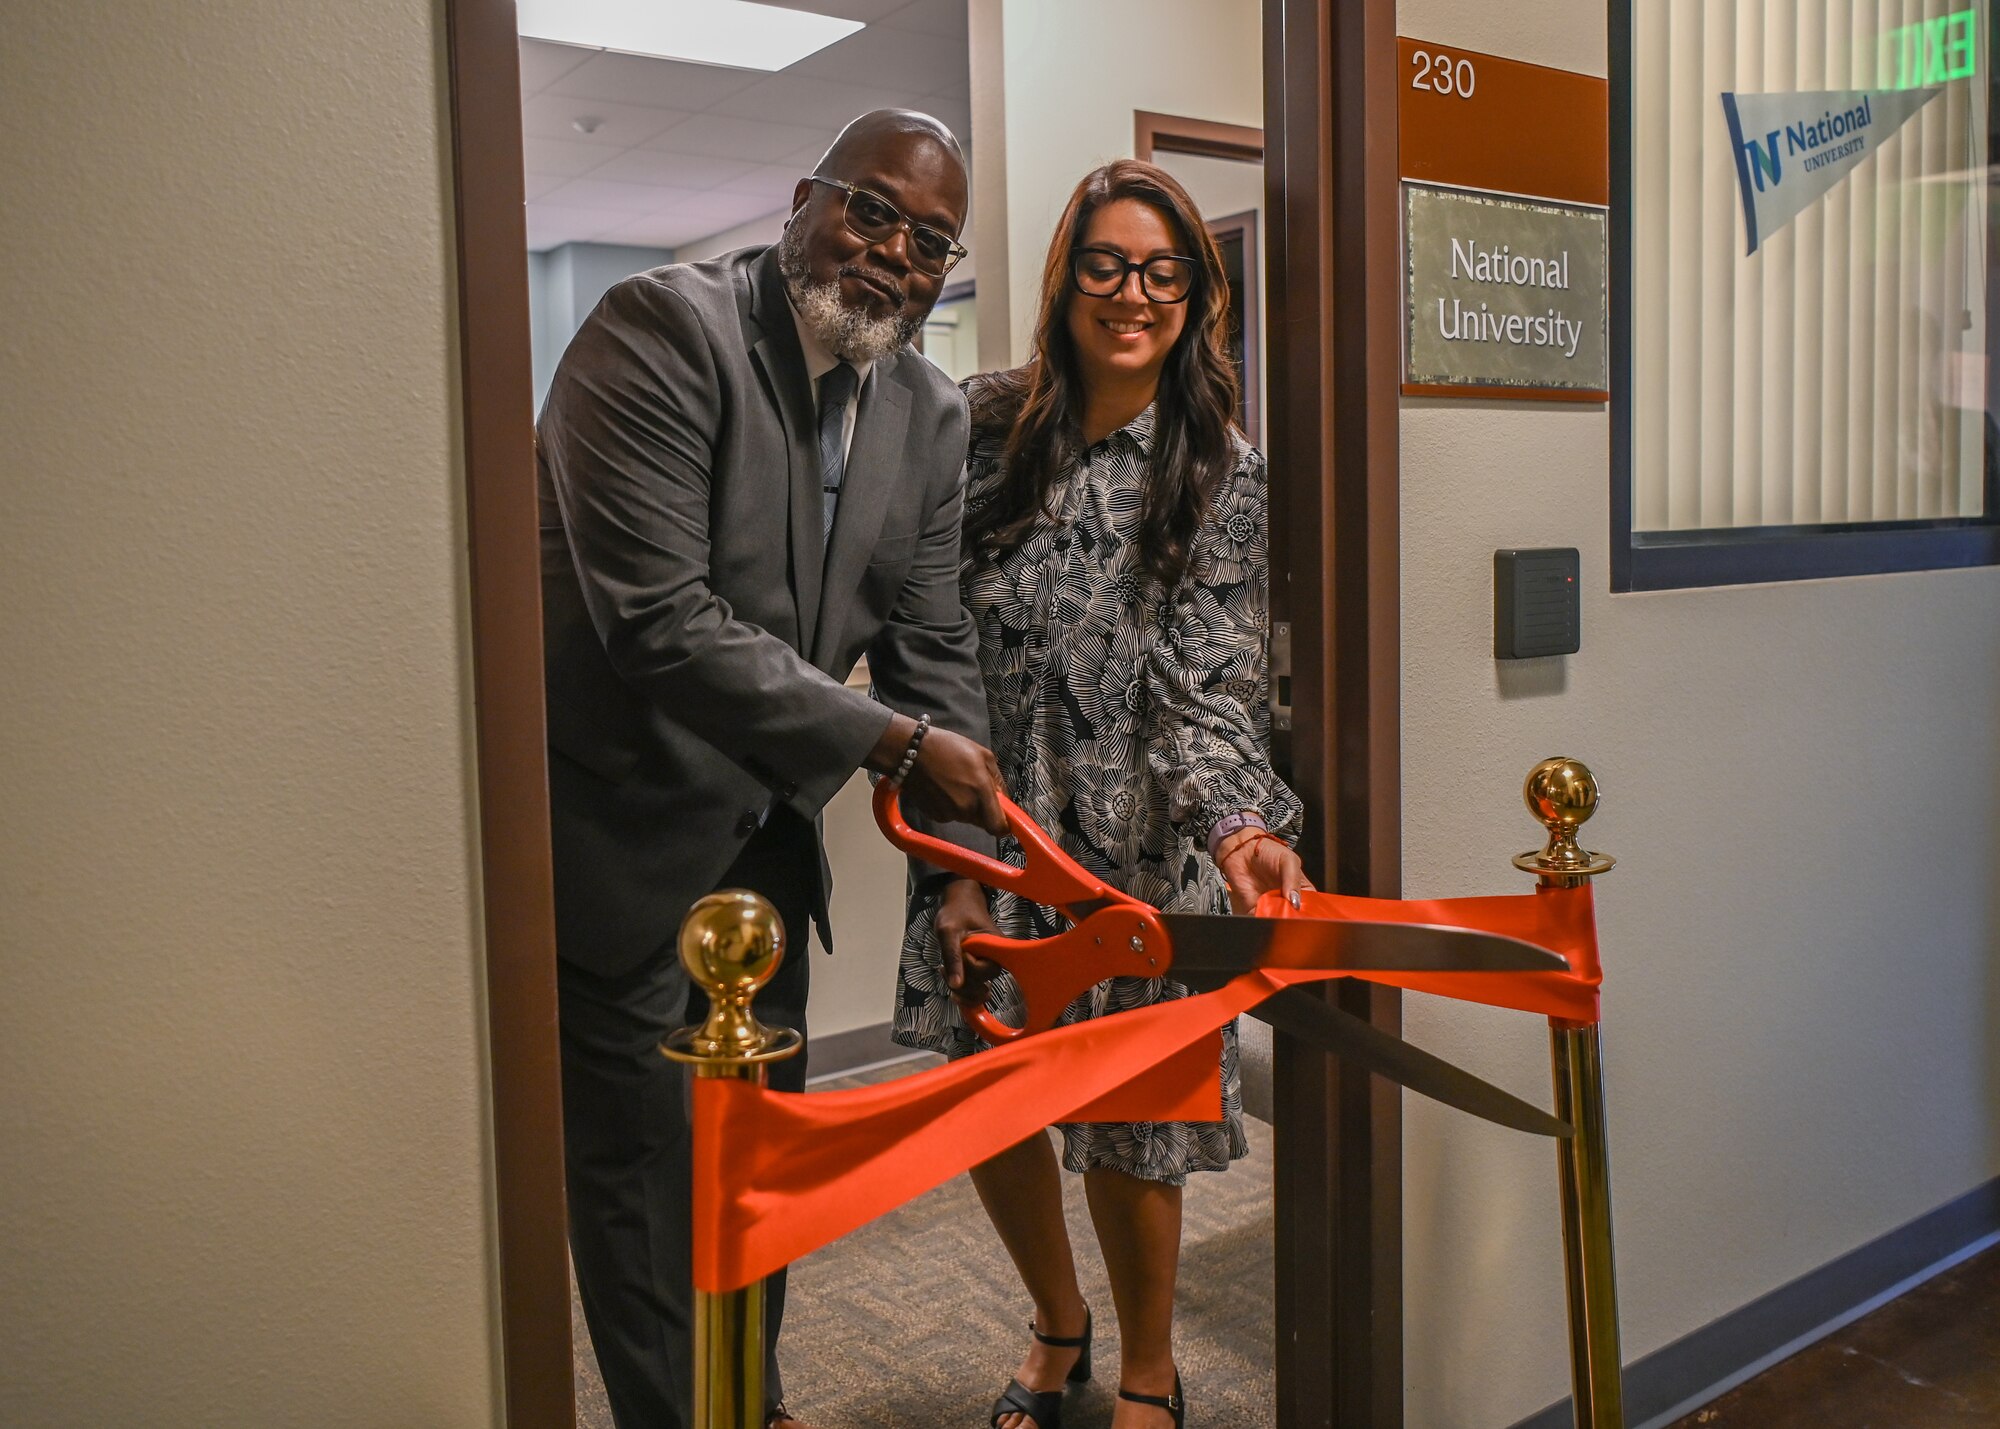 A college associate vice president and senior director pose for a photo and cuts their school's ribbon during an education center open house.